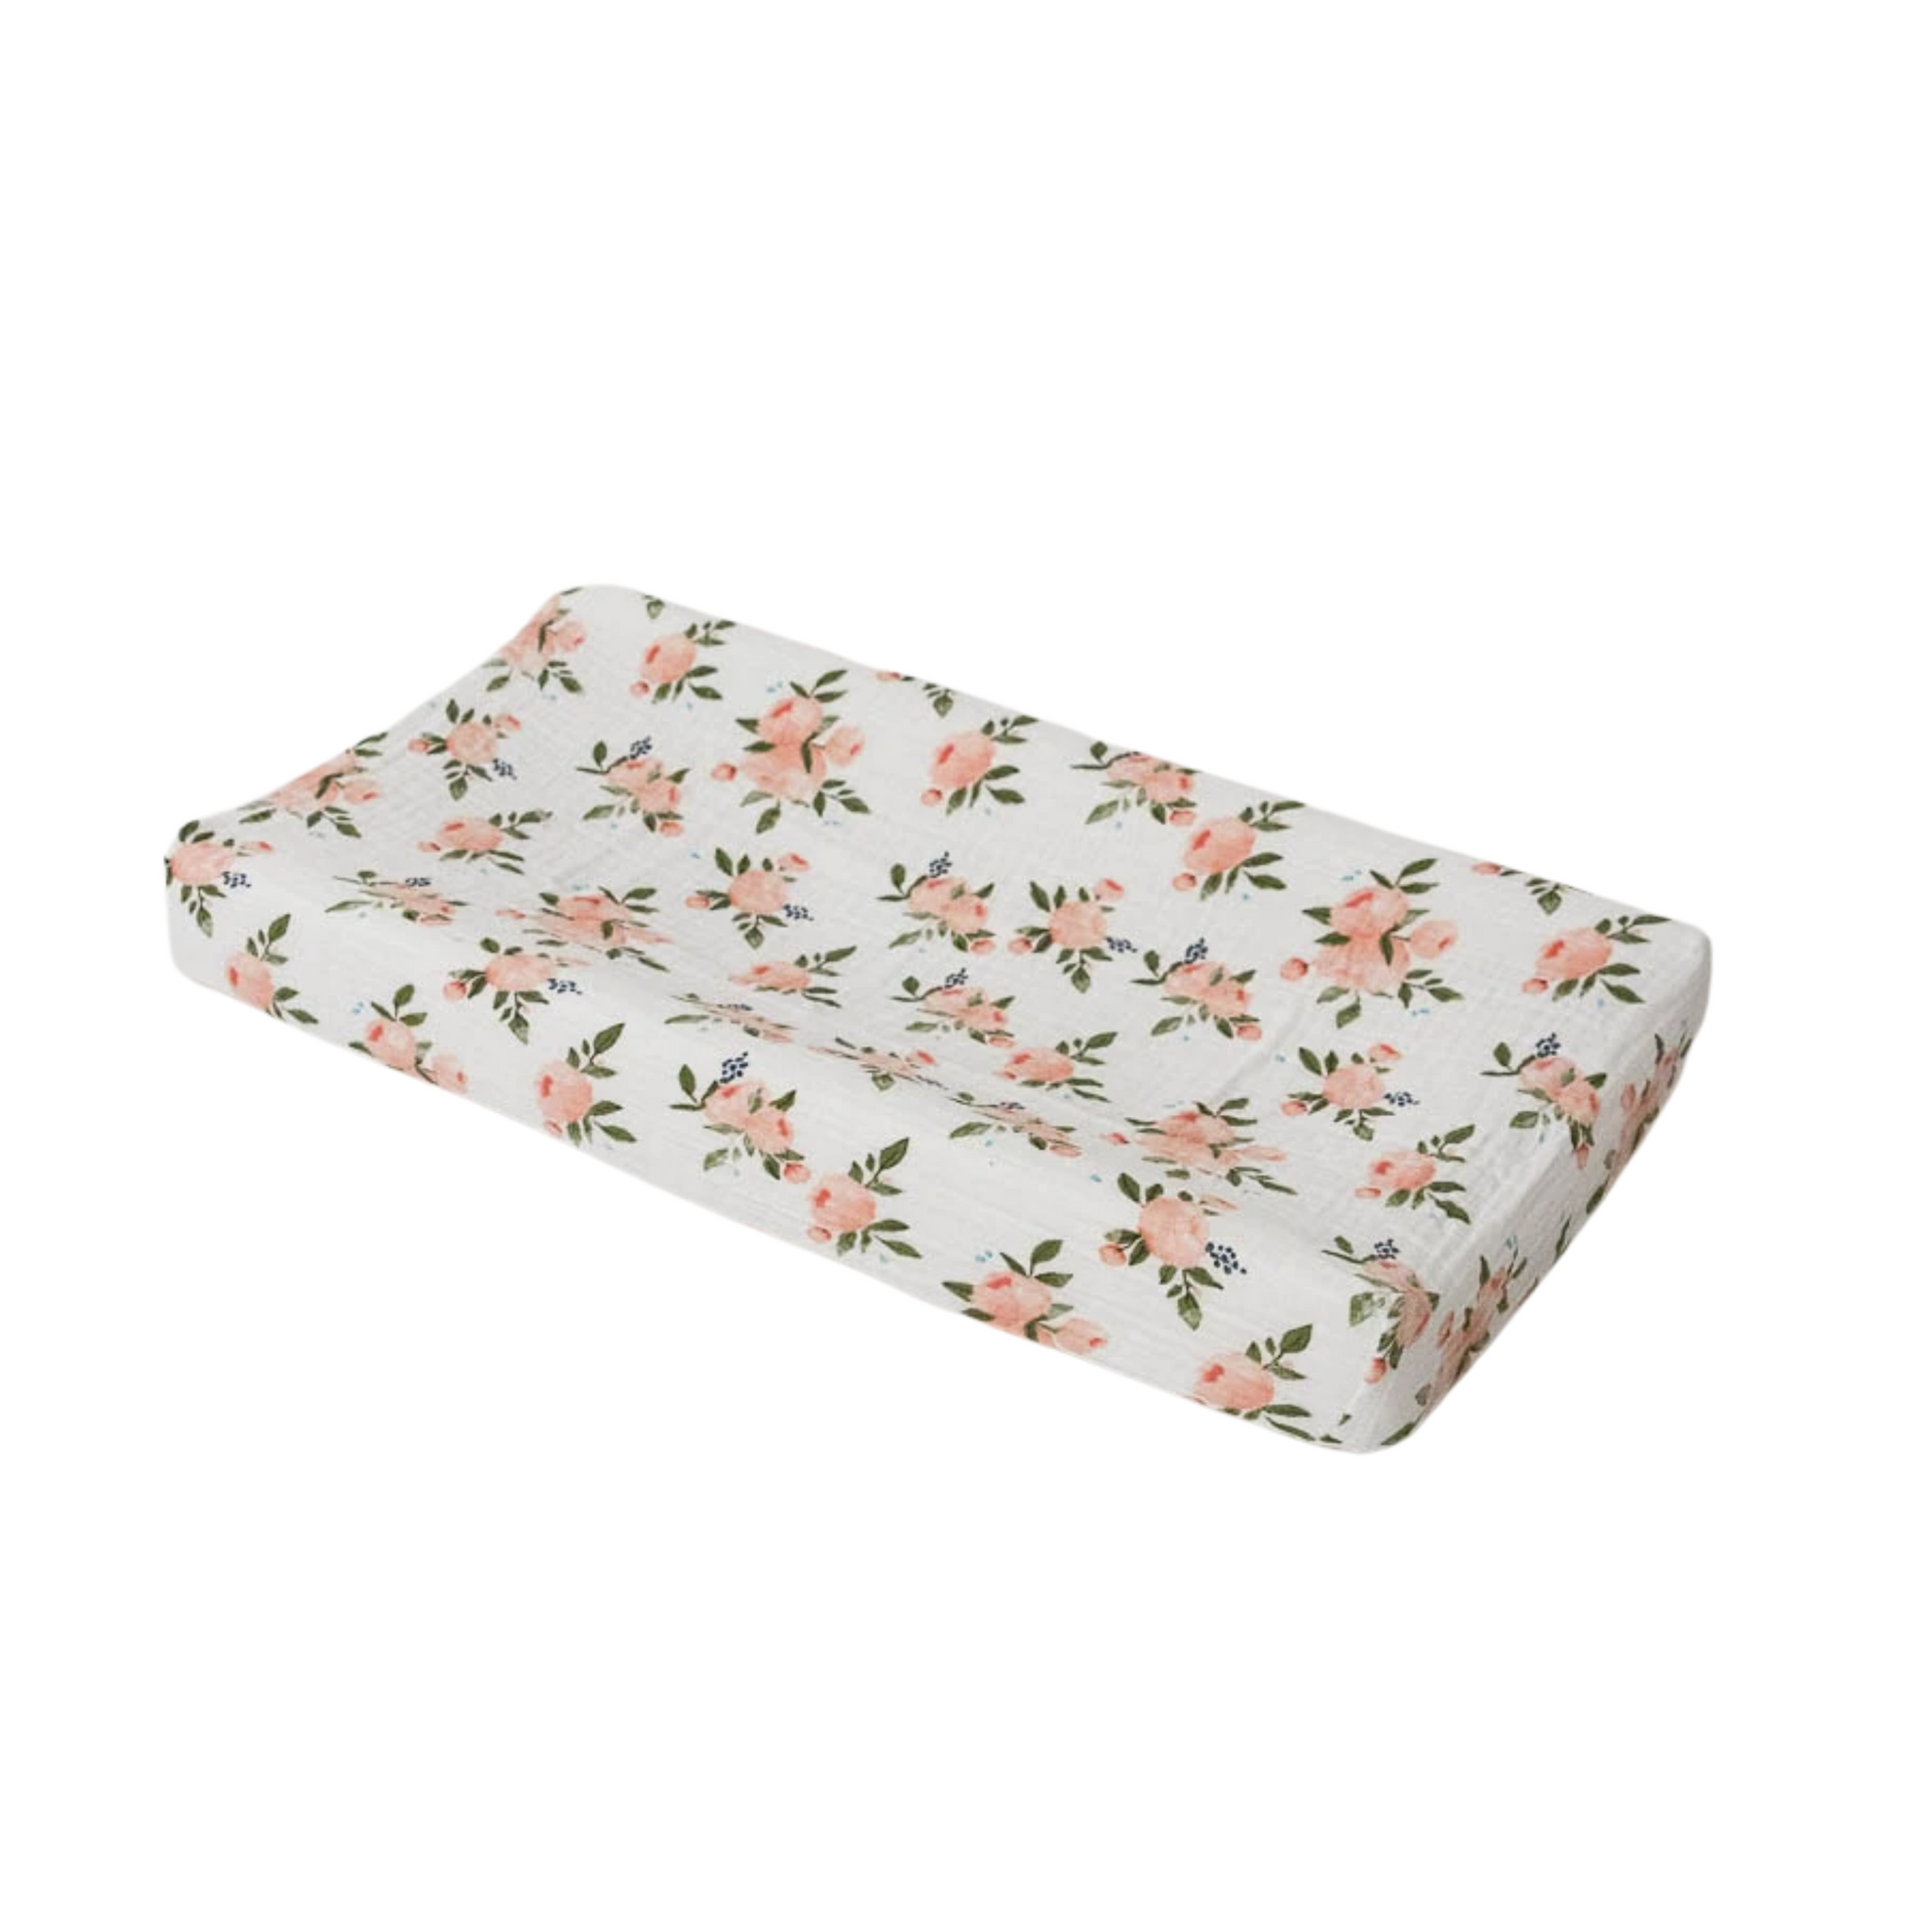 Cotton Muslin Changing Pad Cover - Watercolor Roses - HoneyBug 